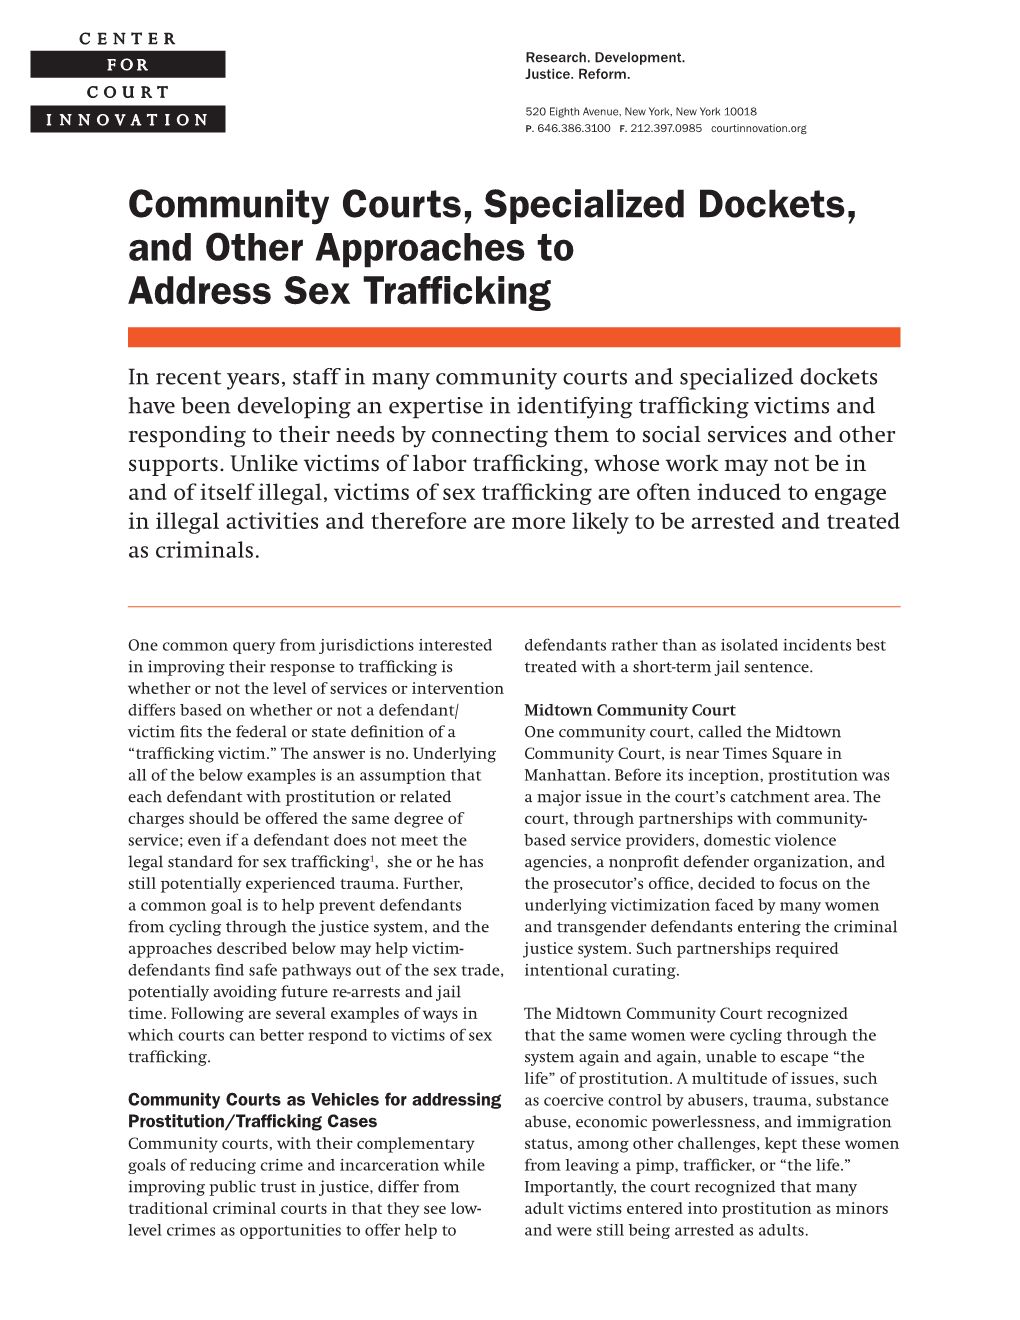 Community Courts, Specialized Dockets, and Other Approaches to Address Sex Trafficking